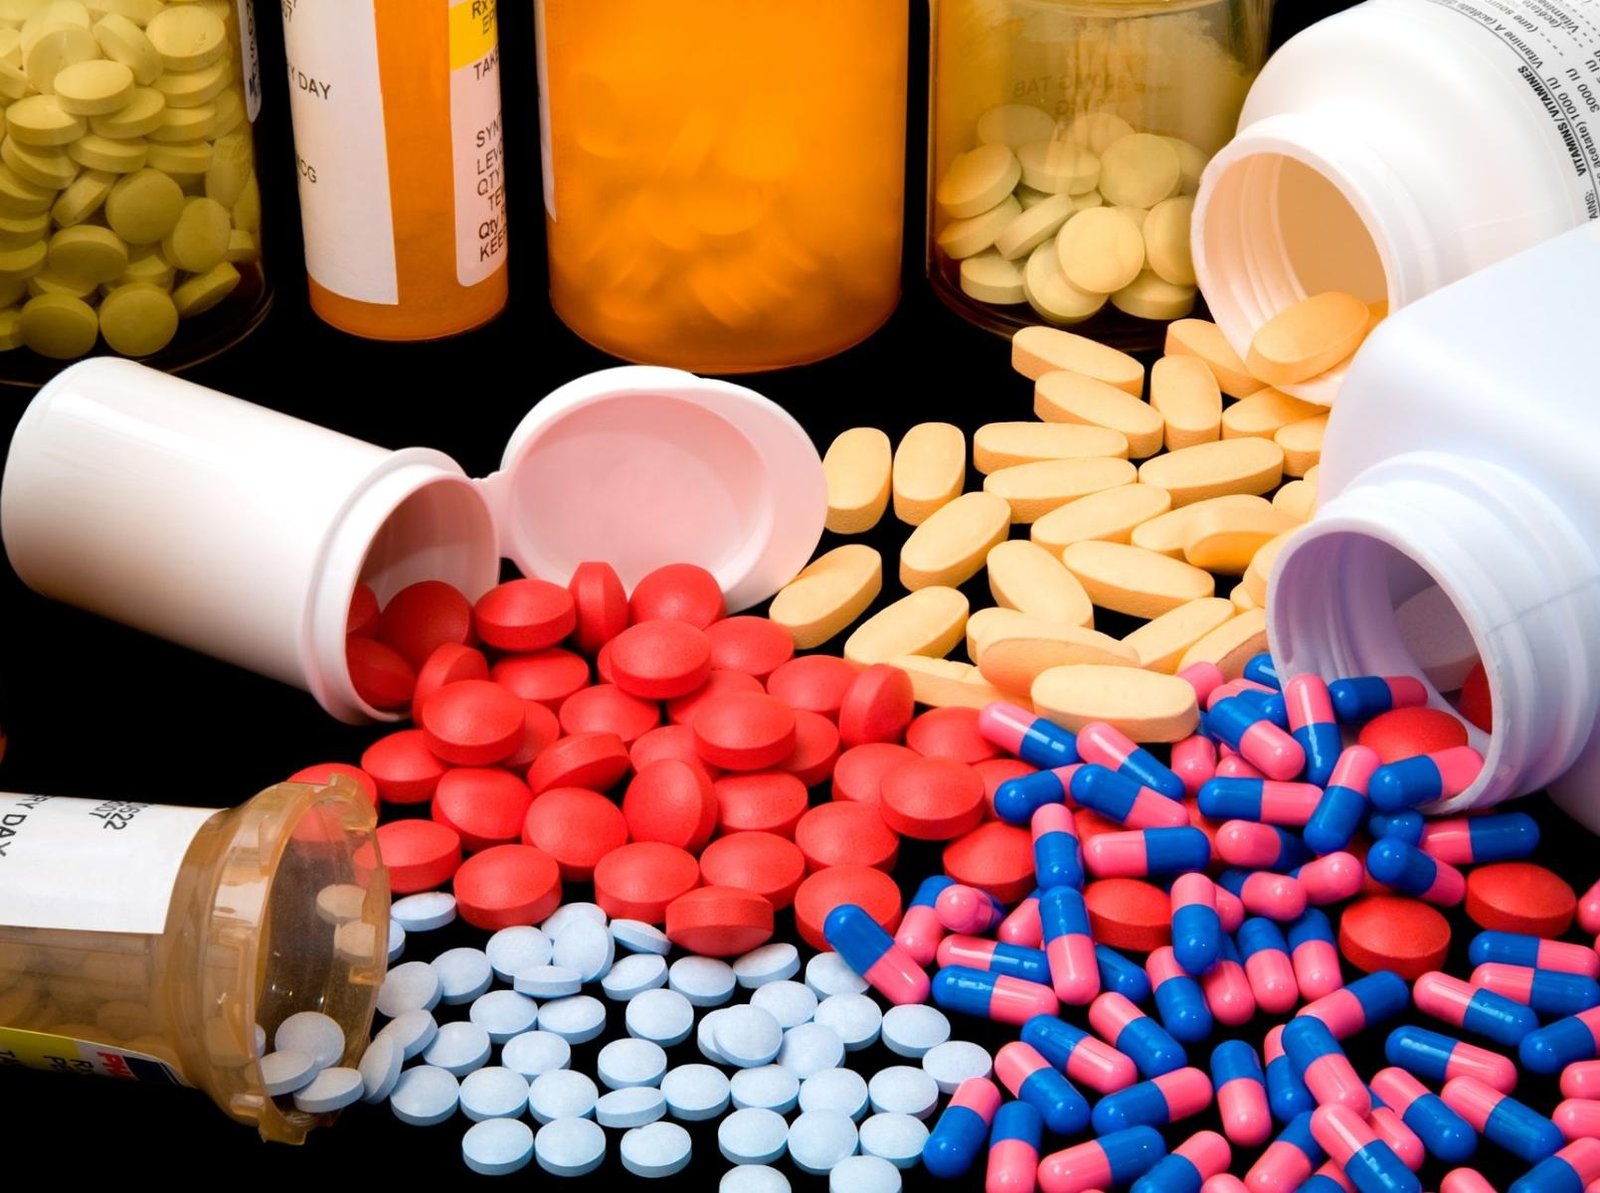 The Most Common Side Effect of Medicines and How to Avoid It